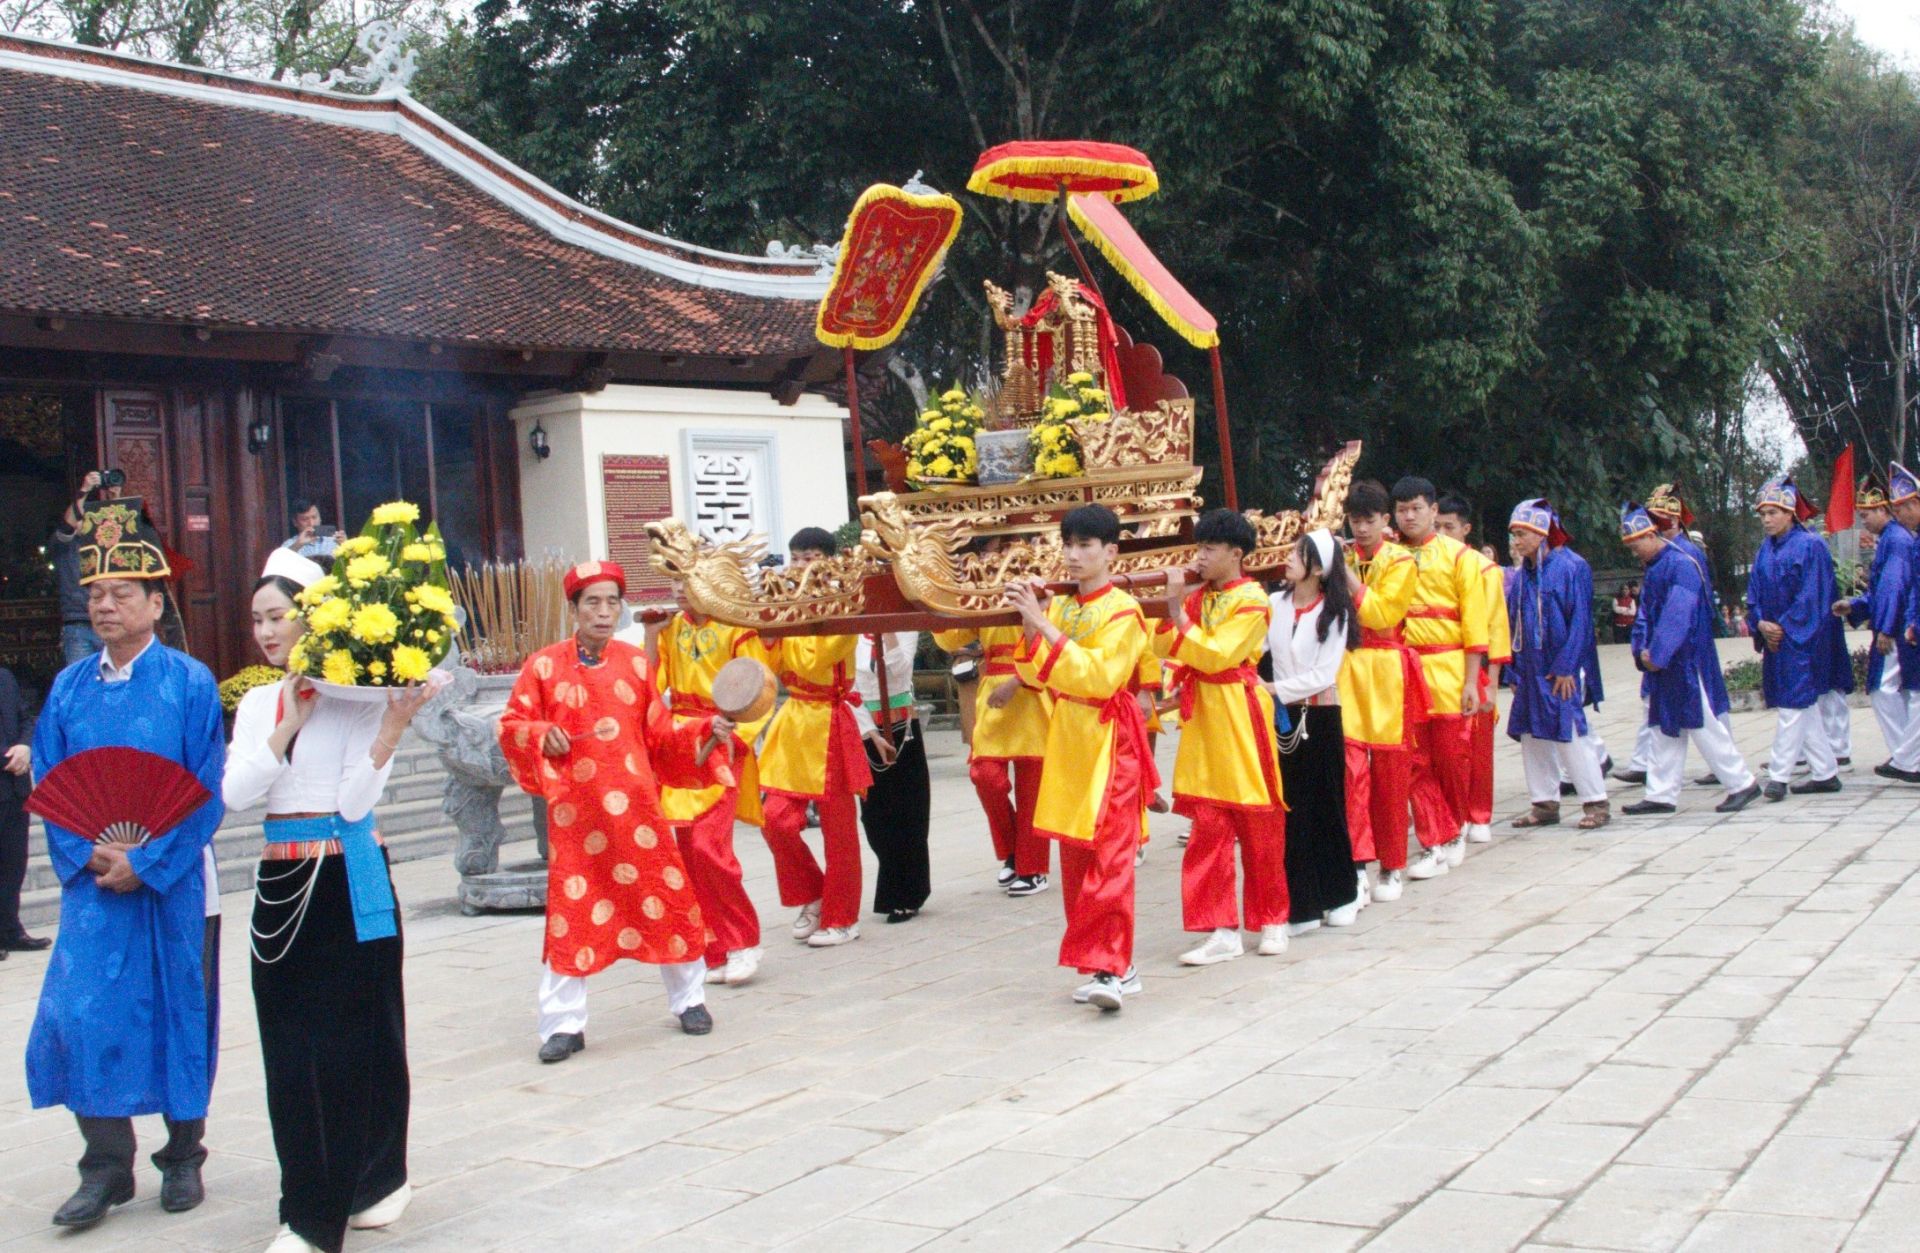 The procession carrying the palanquin from Muong Lam hamlet’s temple to Phong Phu communal stadium